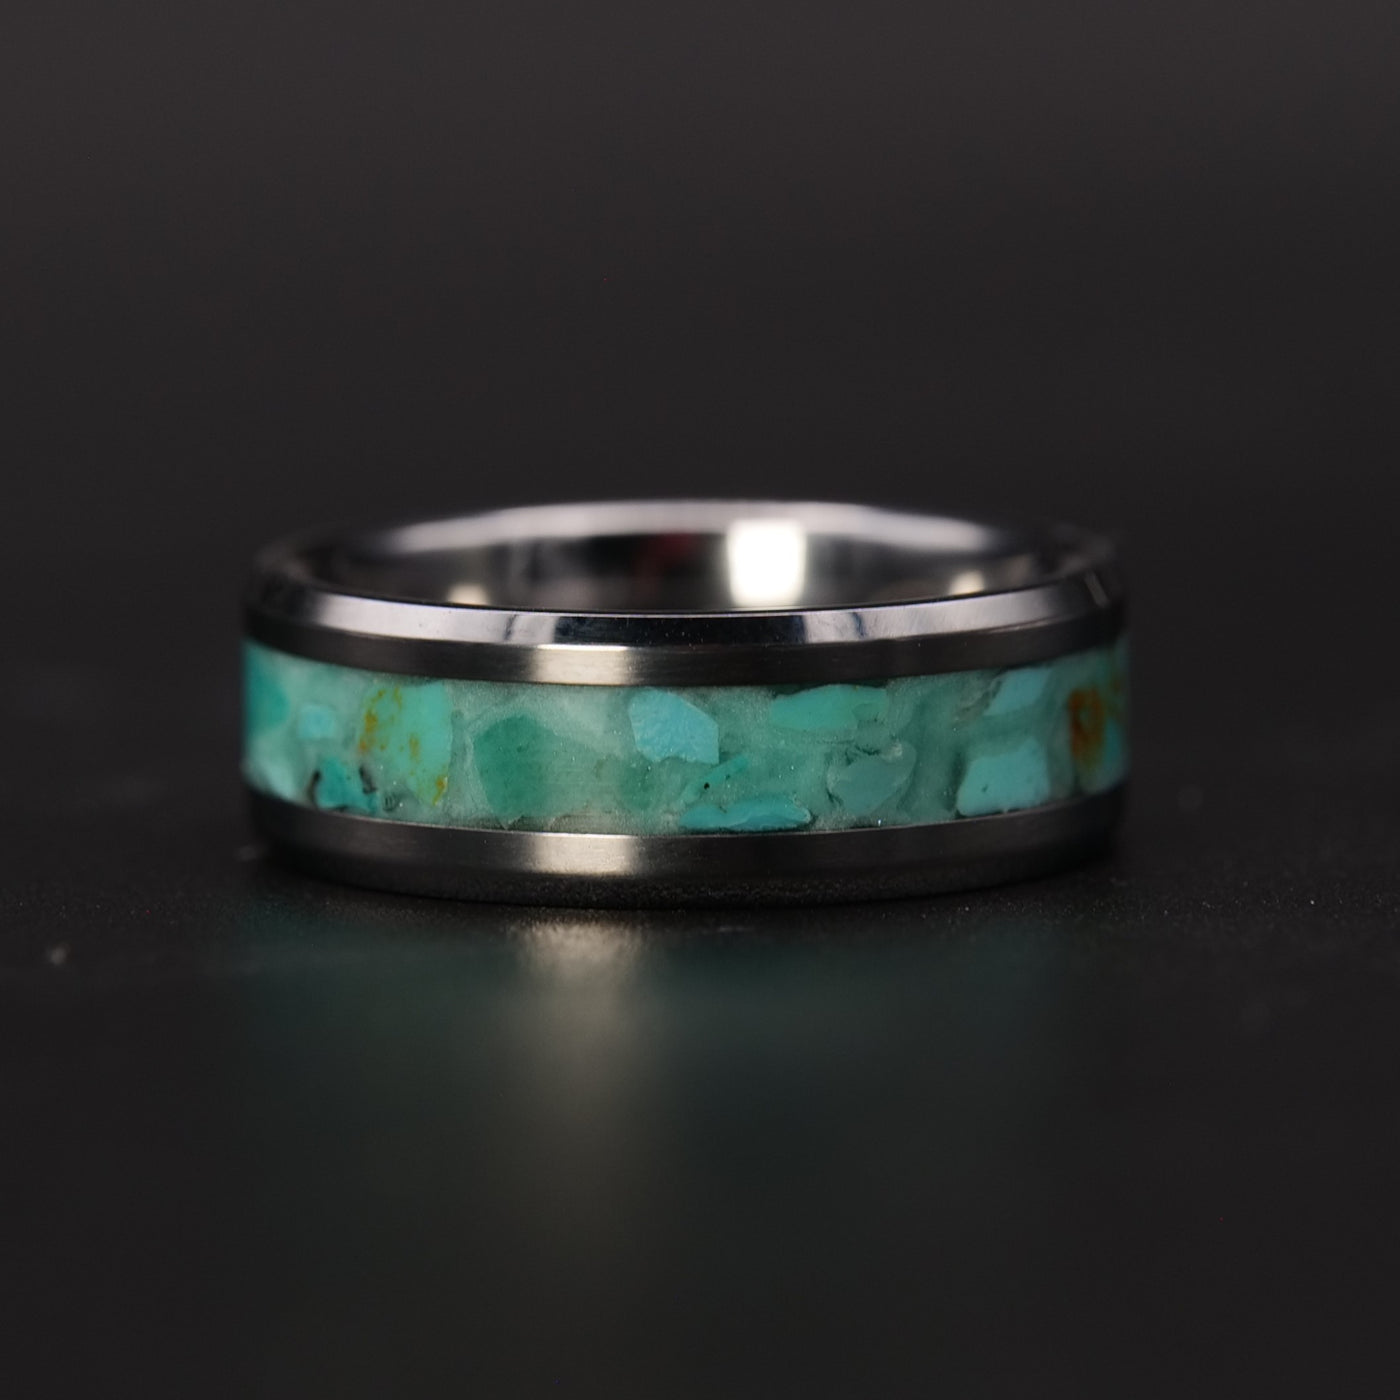 The Trident Ring | Turquoise Glowstone Ring - Patrick Adair Designs